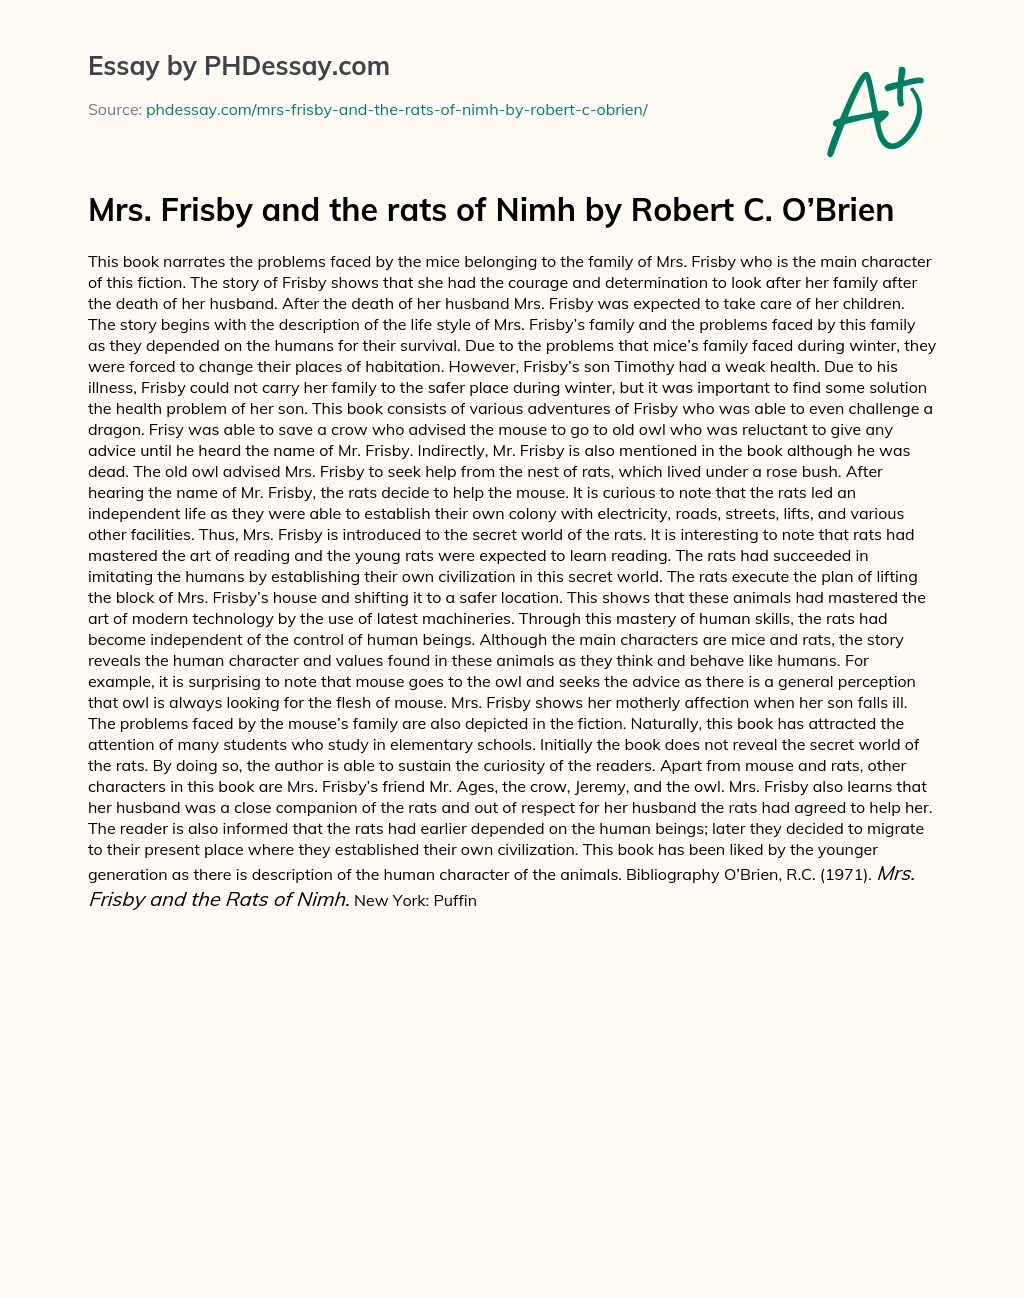 Mrs. Frisby and the rats of Nimh by Robert C. O’Brien essay